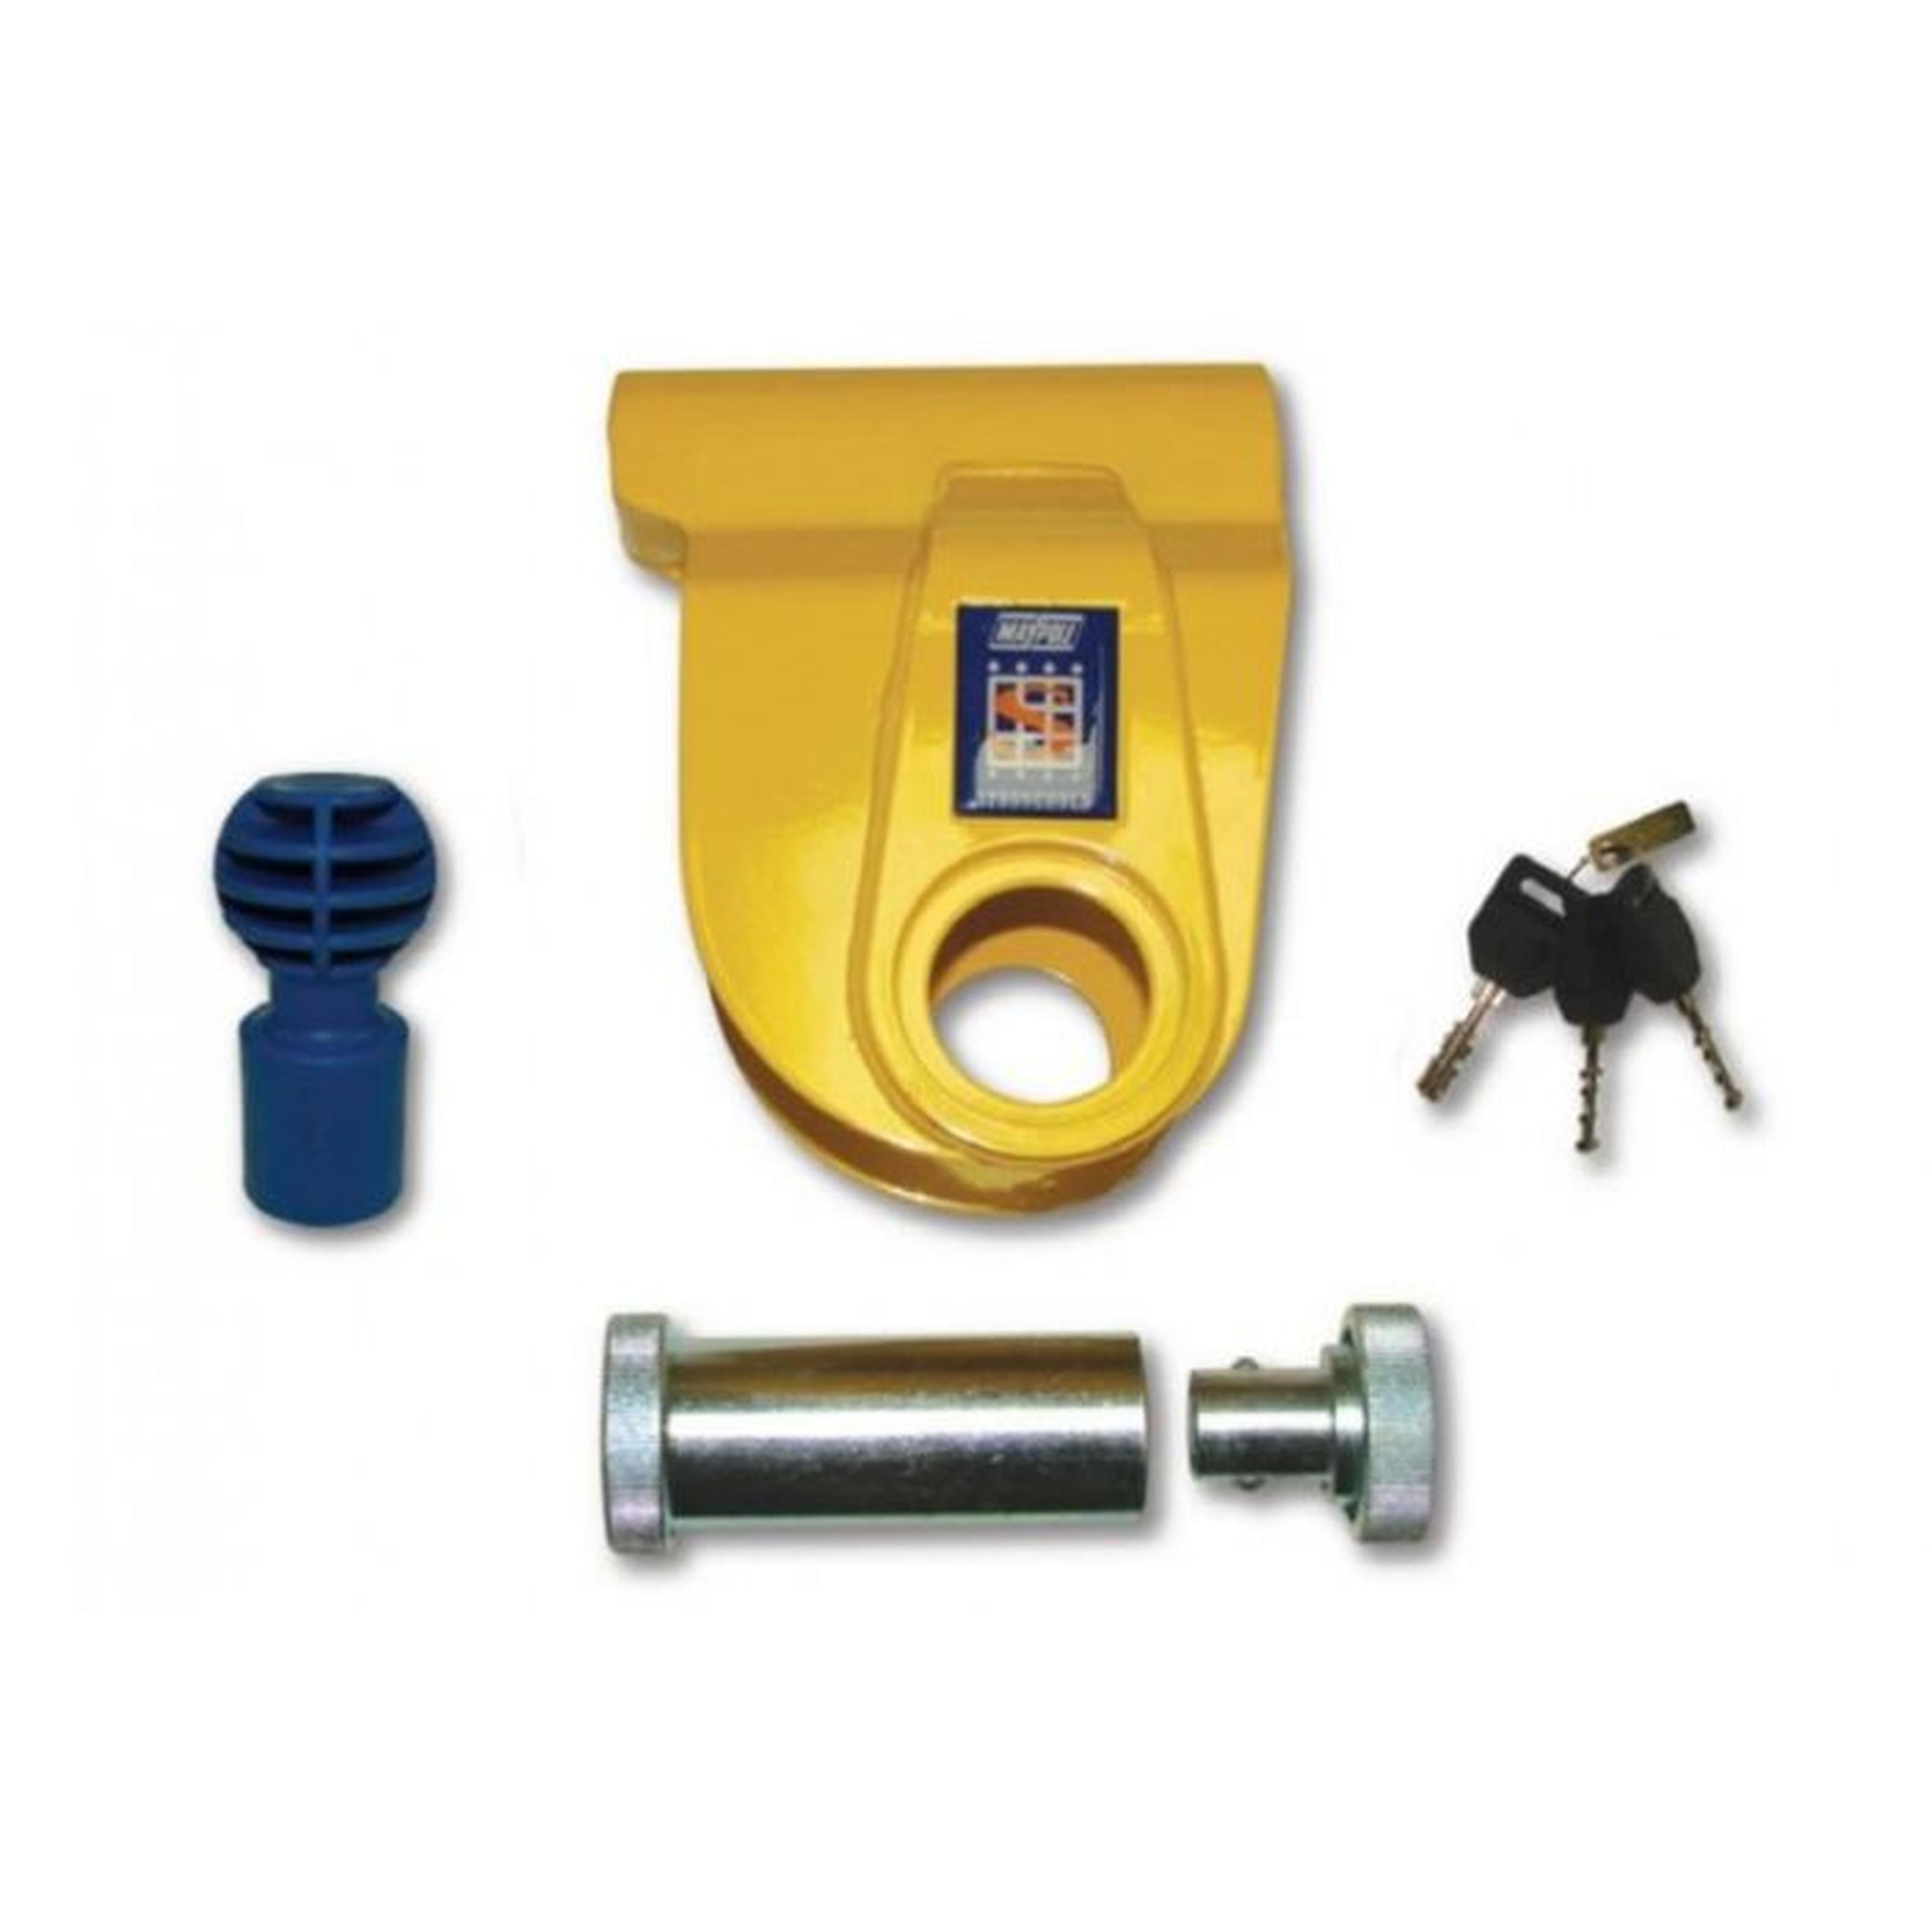 Towing Hitch Locks for Trailers & Caravans - SAS Security Products